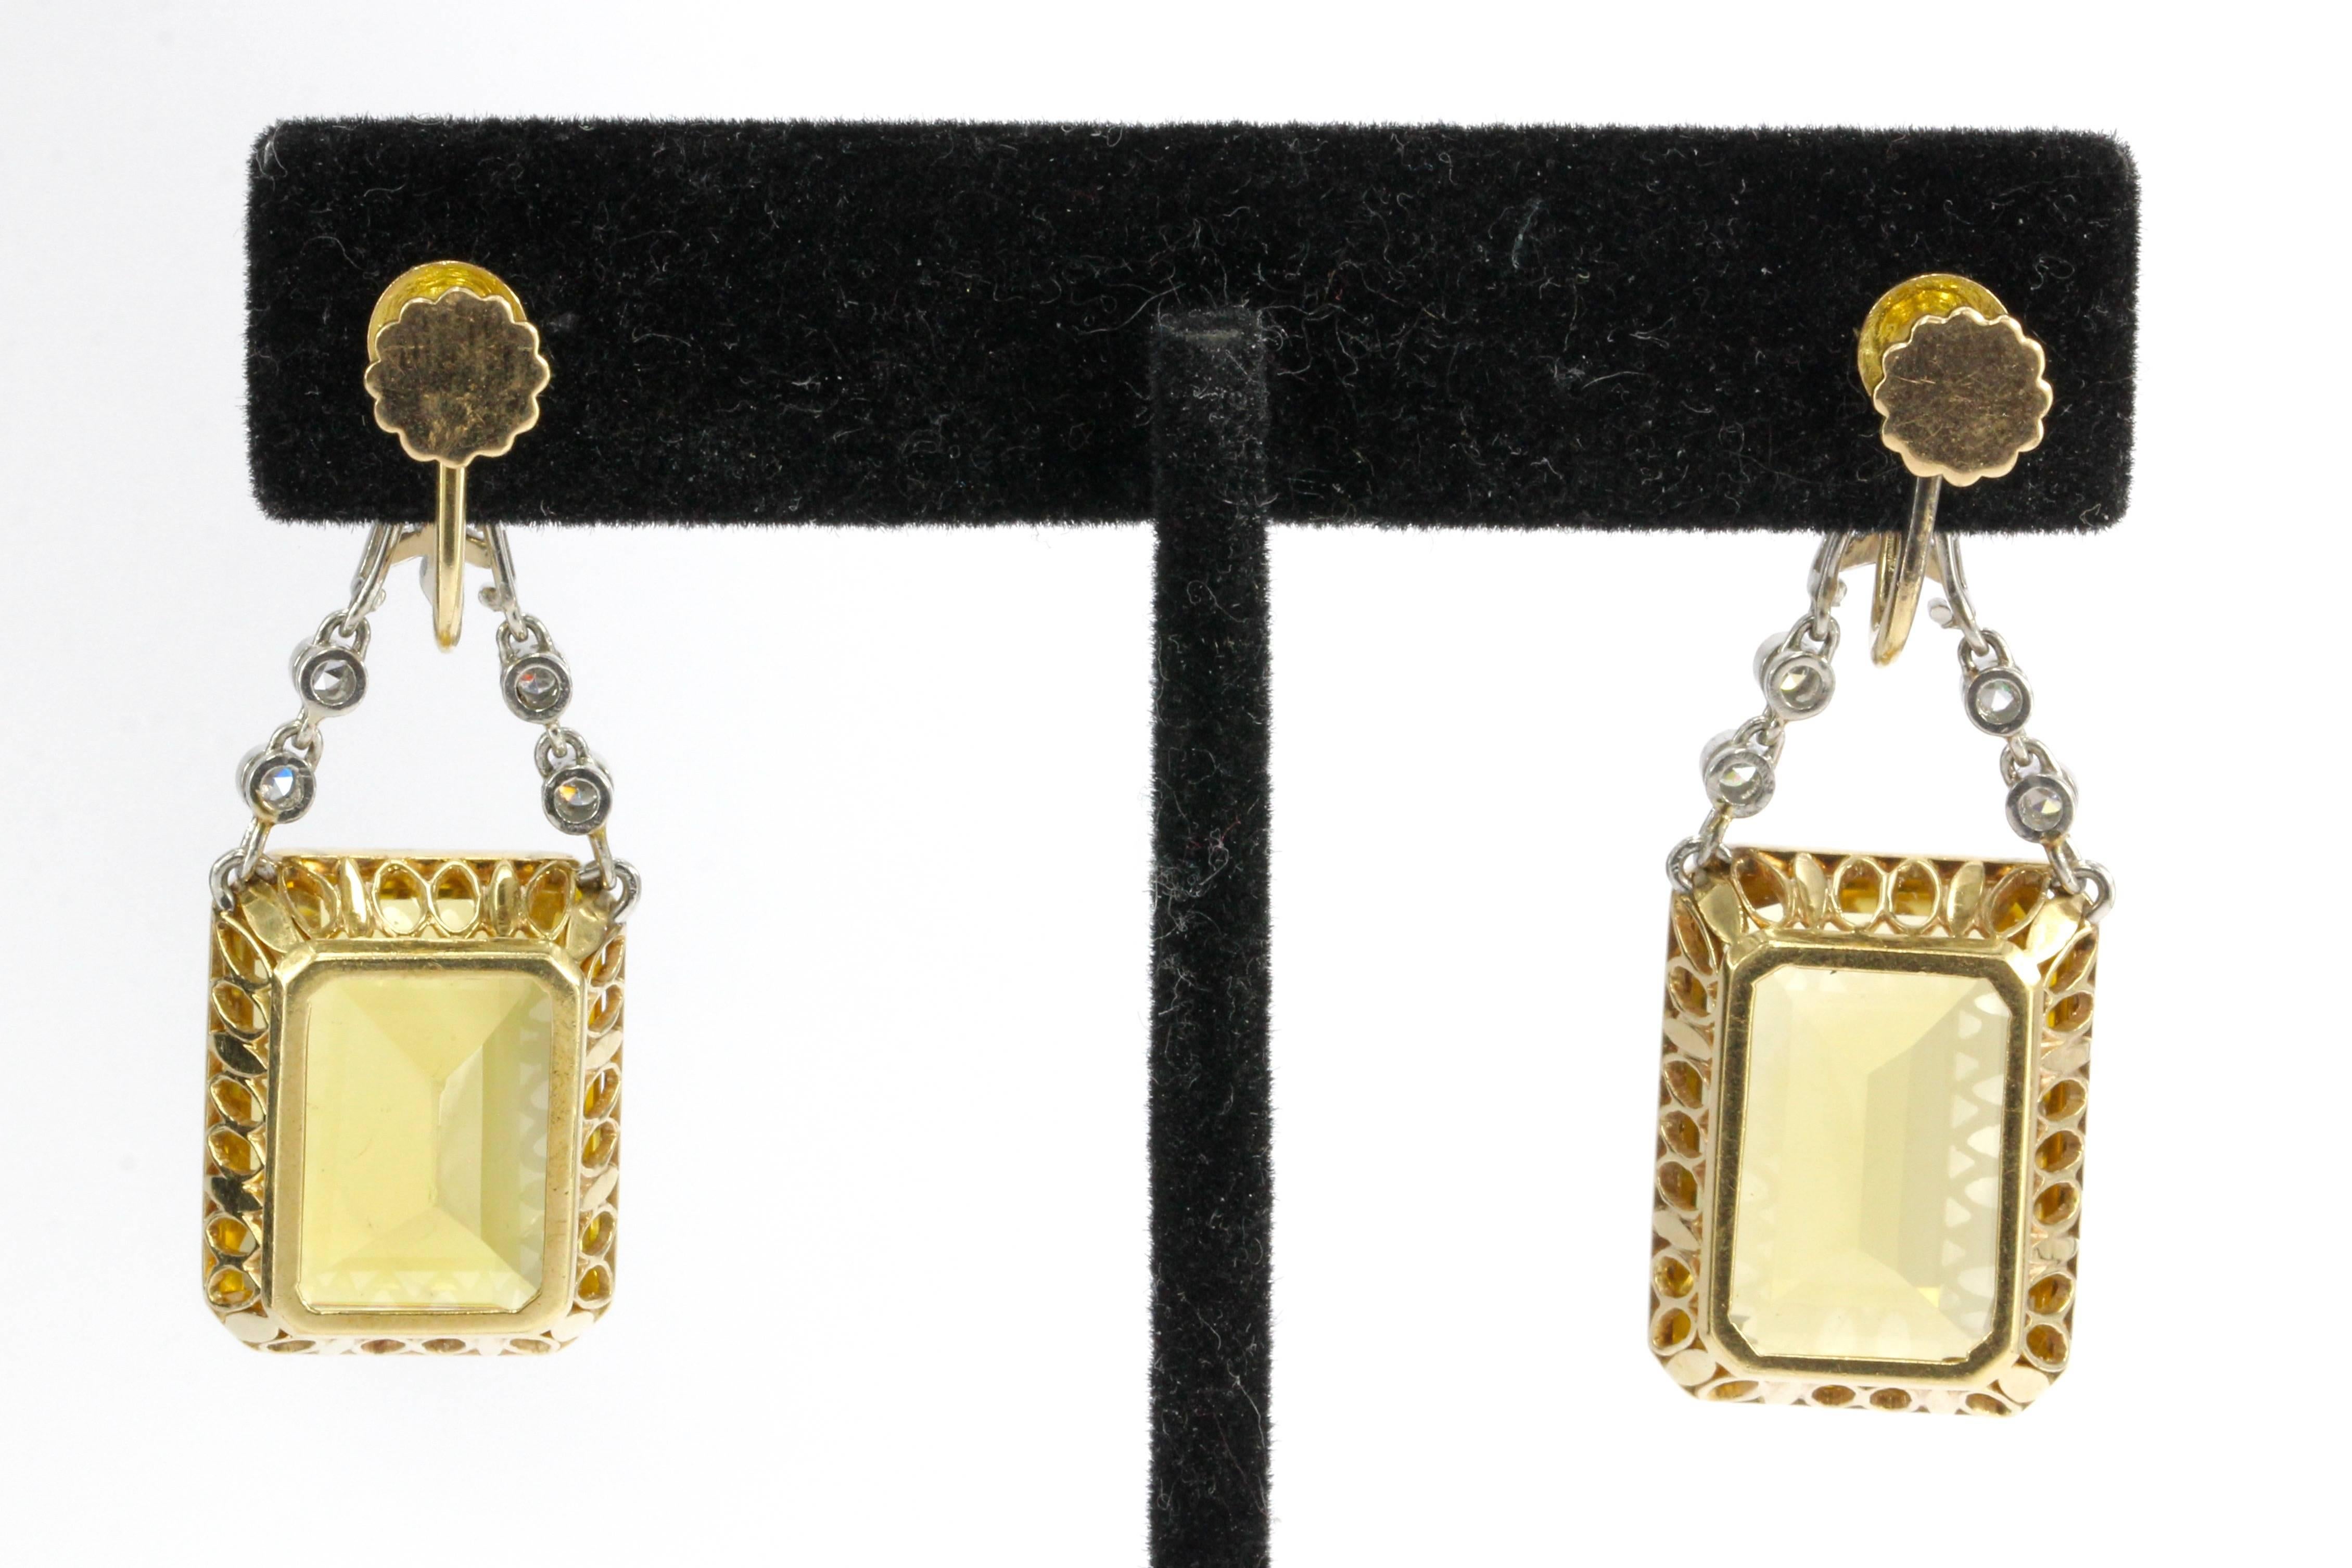 Era: Art Deco c.1930's

Screw backs for Non-pierced ears

Hallmarks: 14Kt on earring back

Composition: Platinum with 14K Yellow Gold

Primary Stone: Citrine

Stone Carat: Approximately 32 Carats

Accent Stone:  Diamonds

Color/Clarity: G/H -